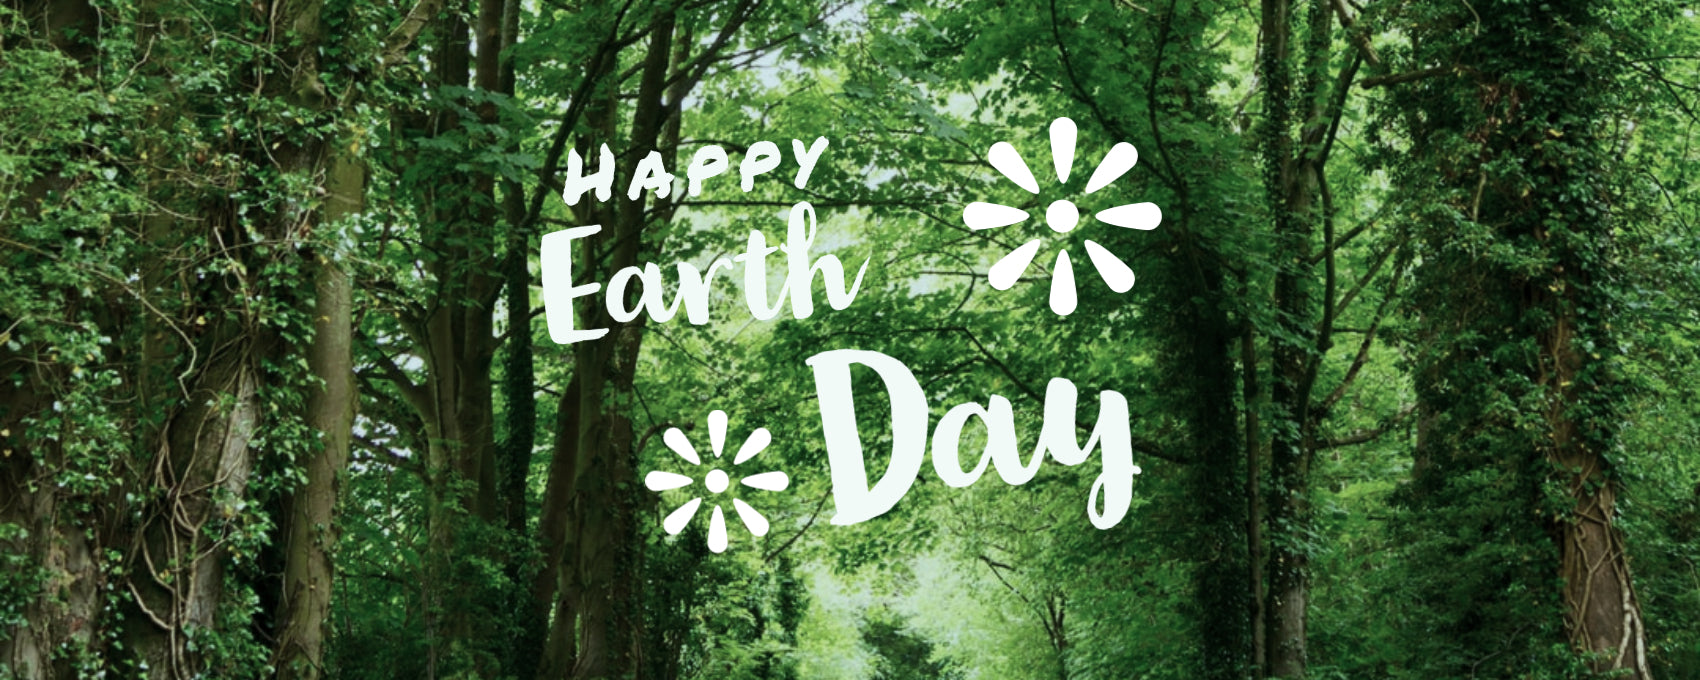 Eco-Friendly Choices on Earth Day & Every Day!